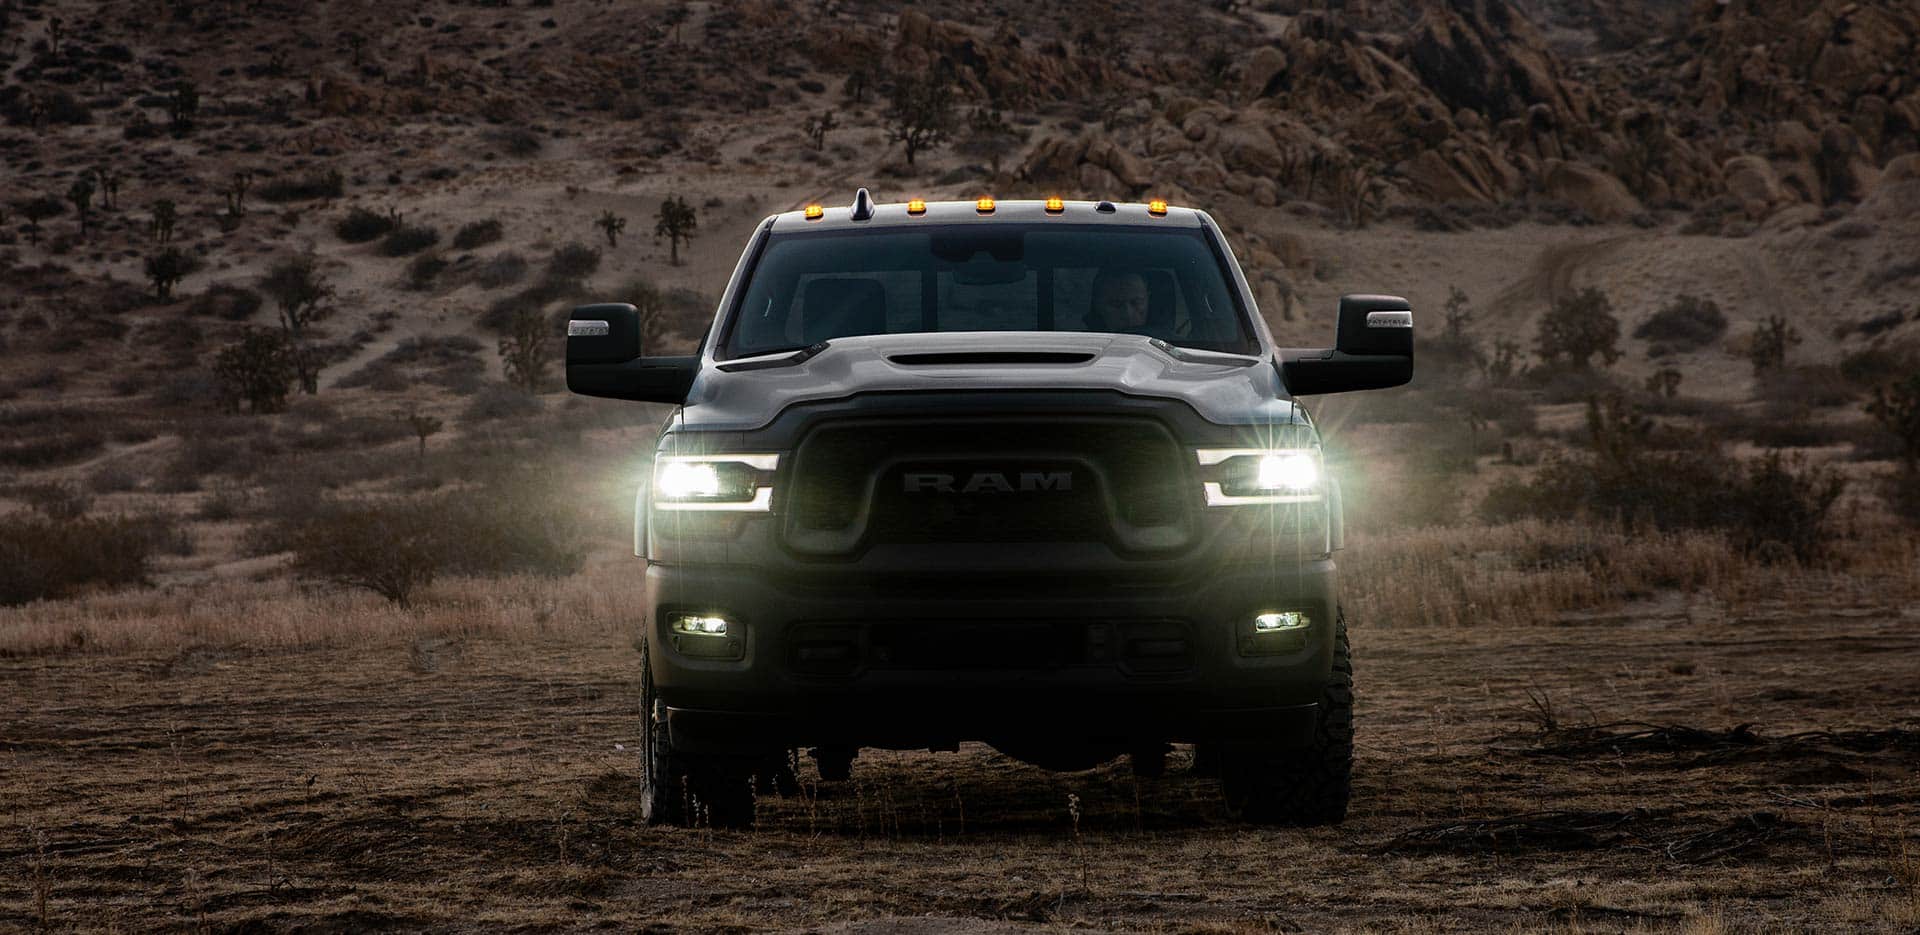 Display A head-on view of a 2023 Ram 2500 Rebel being driven off-road, in the desert at dusk, with its headlamps on.